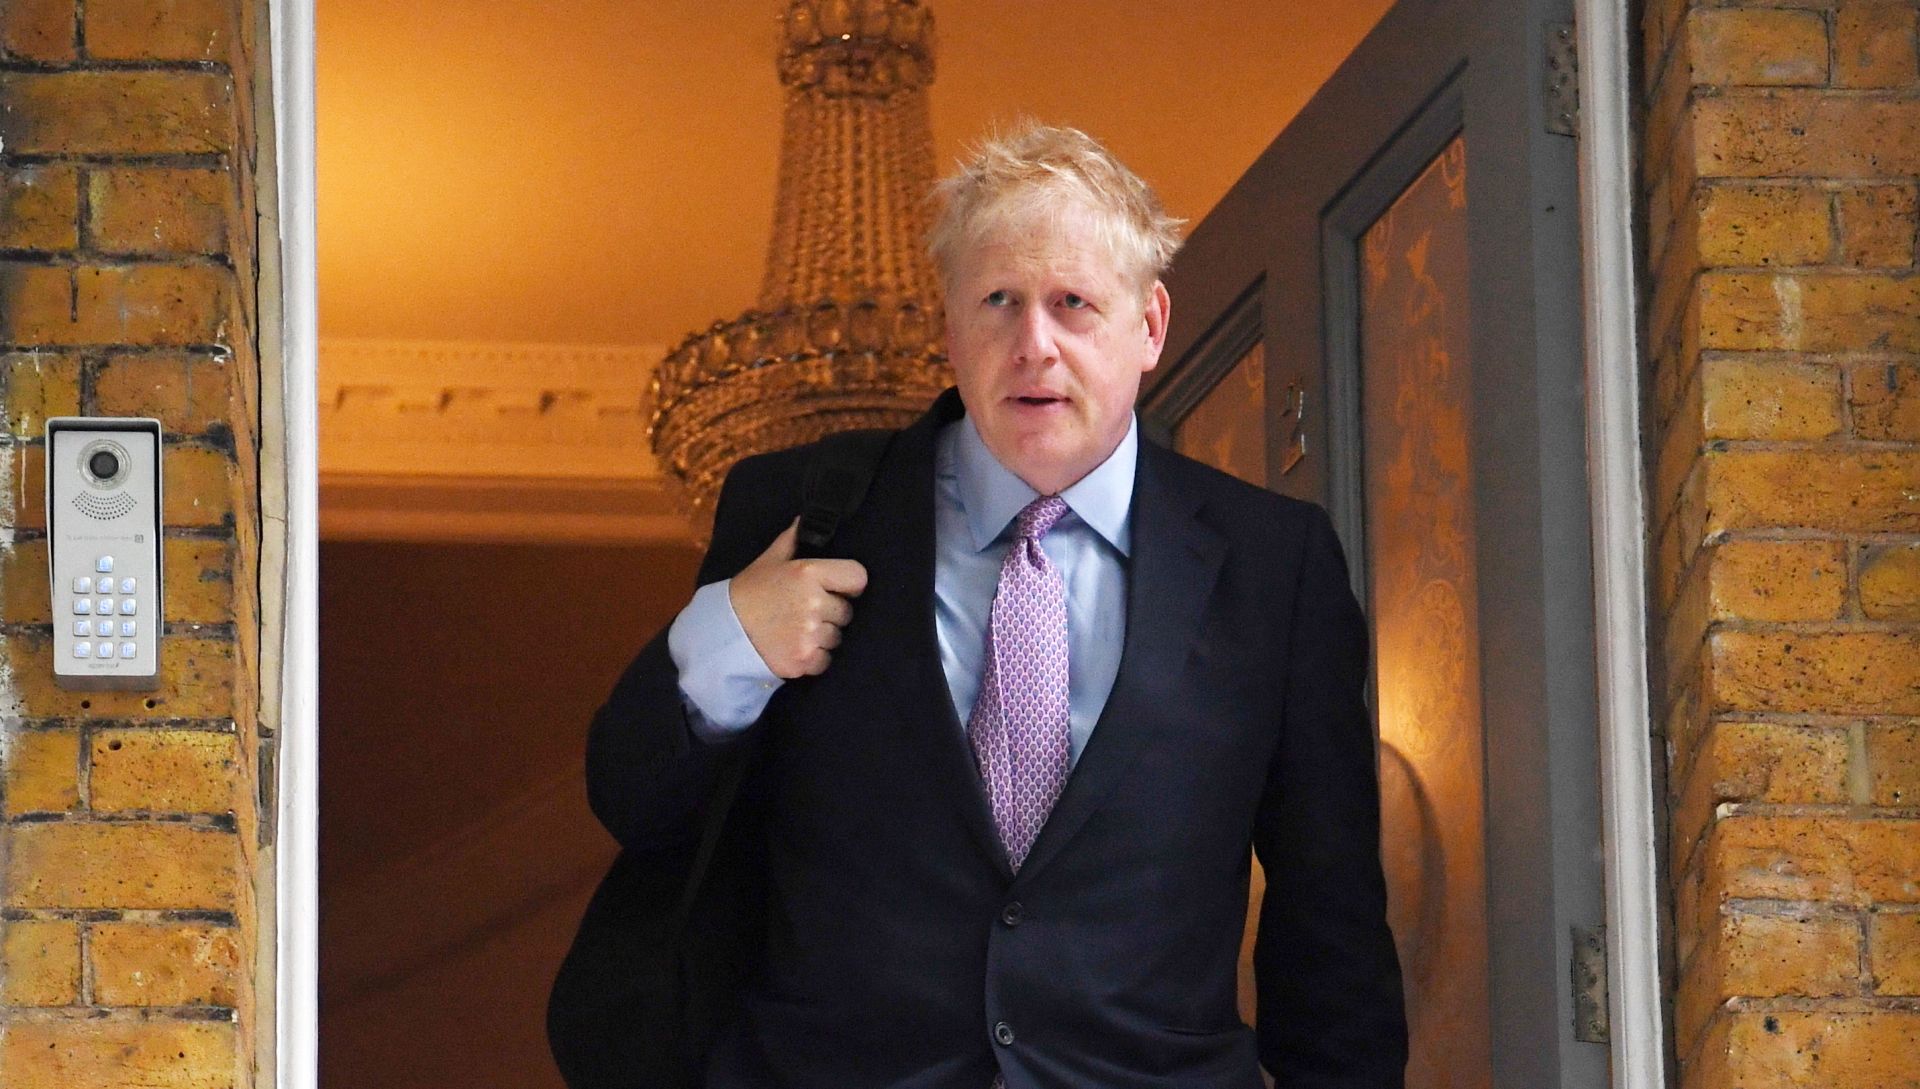 epa07638367 Former British foreign secretary Boris Johnson leaves his house in south London, Britain, 10 June 2019. According to media reports, Boris Johnson, a contestant to replace Theresa May as British Prime Minister, pledged to raise the level for 40 percent income tax from 50,000 to 80,000 British Pounds.  EPA/FACUNDO ARRIZABALAGA